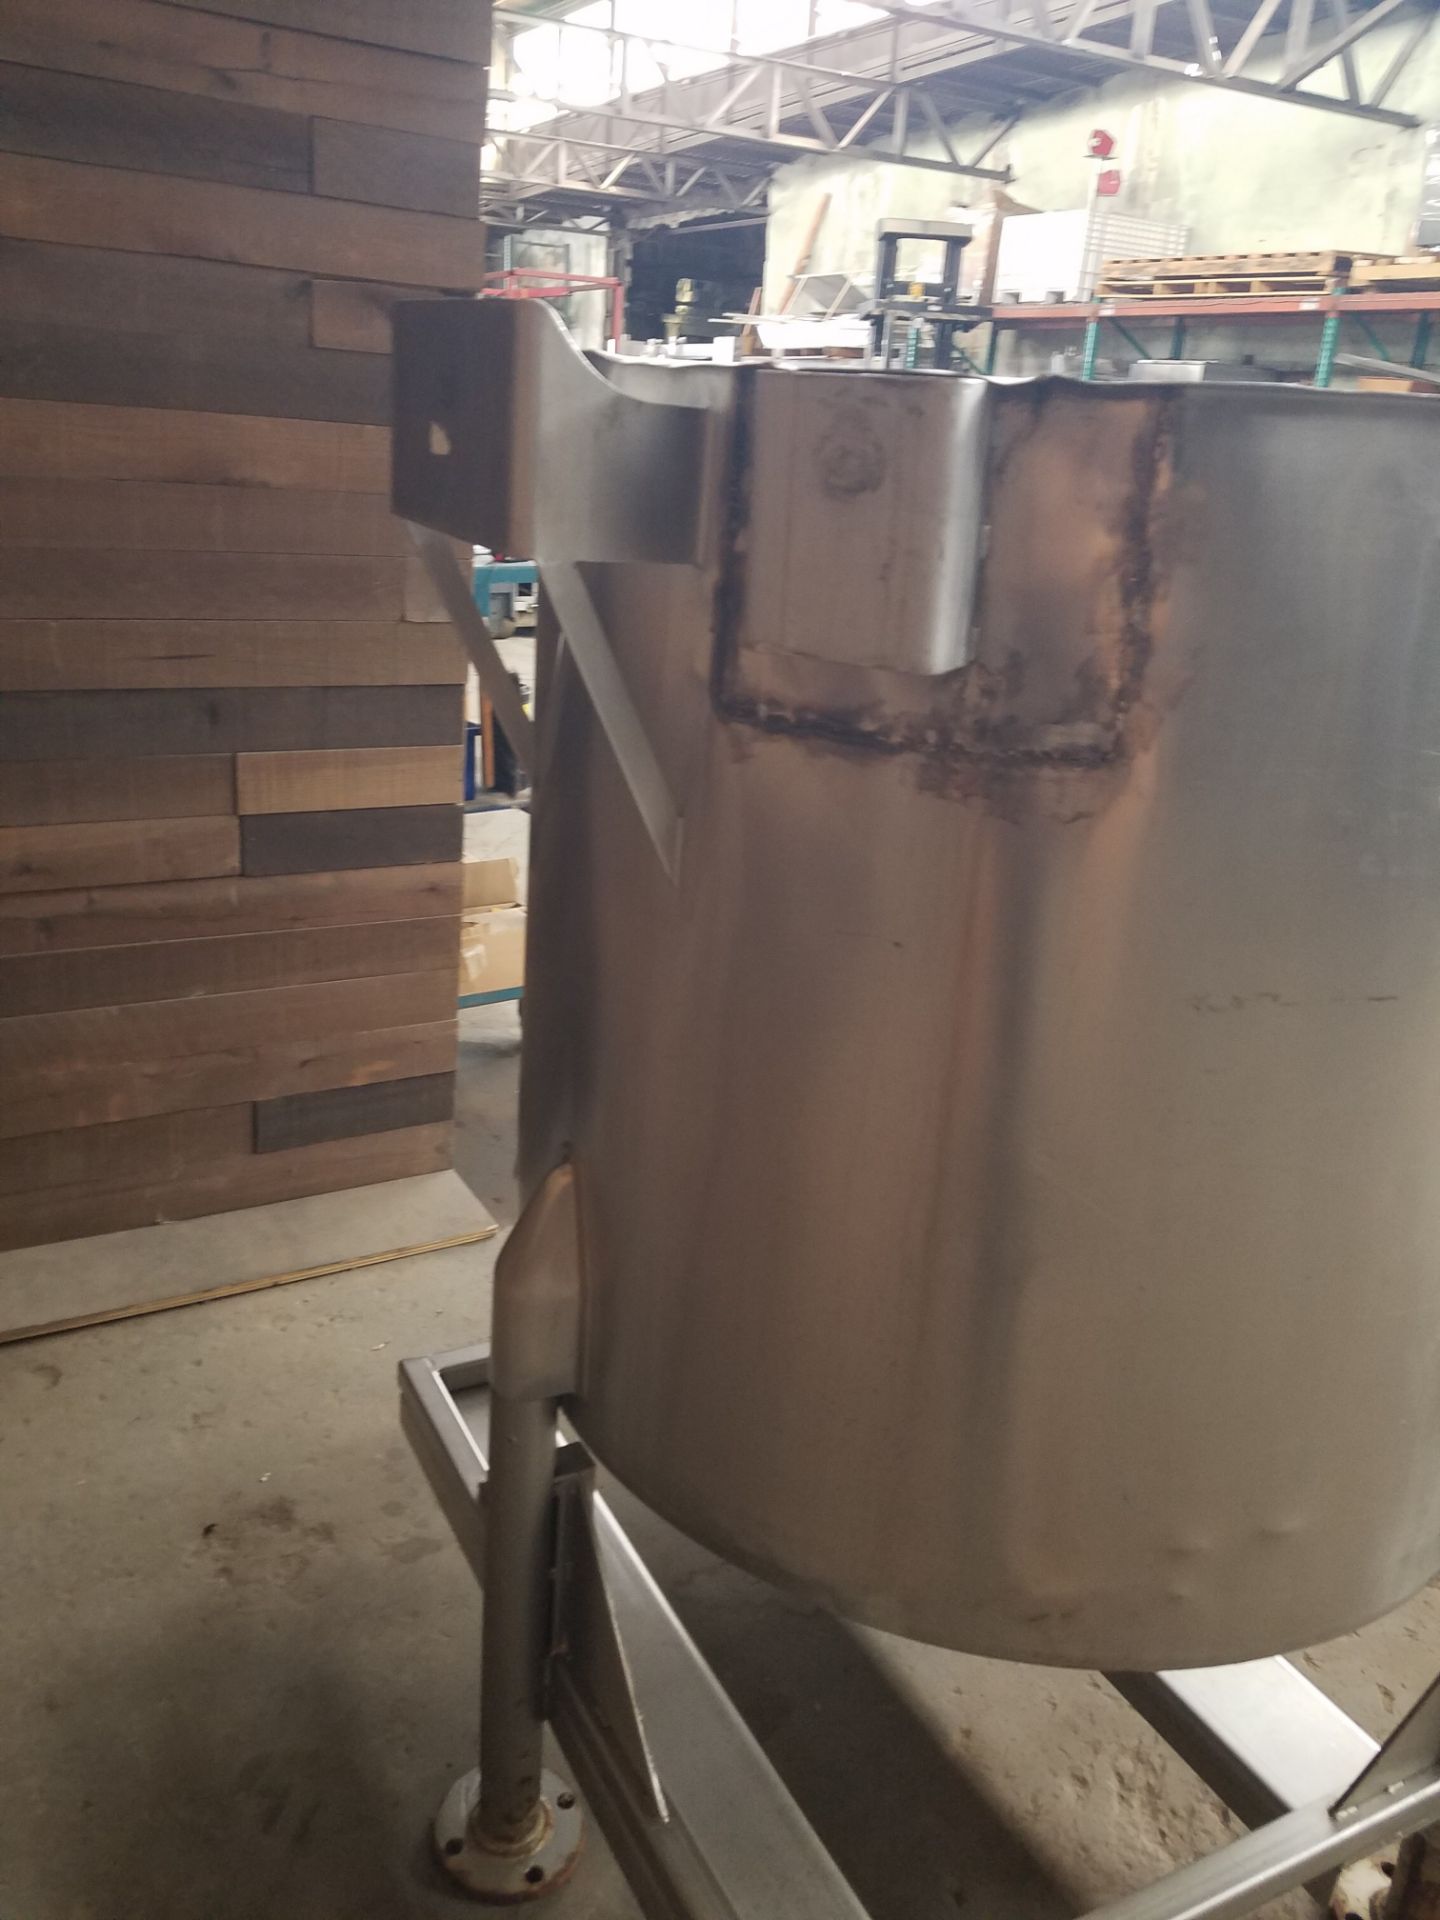 Stainless Steel Mixing Tank, Aprox. 36" wide x 36" high (Located Fort Worth, TX) - Image 3 of 4